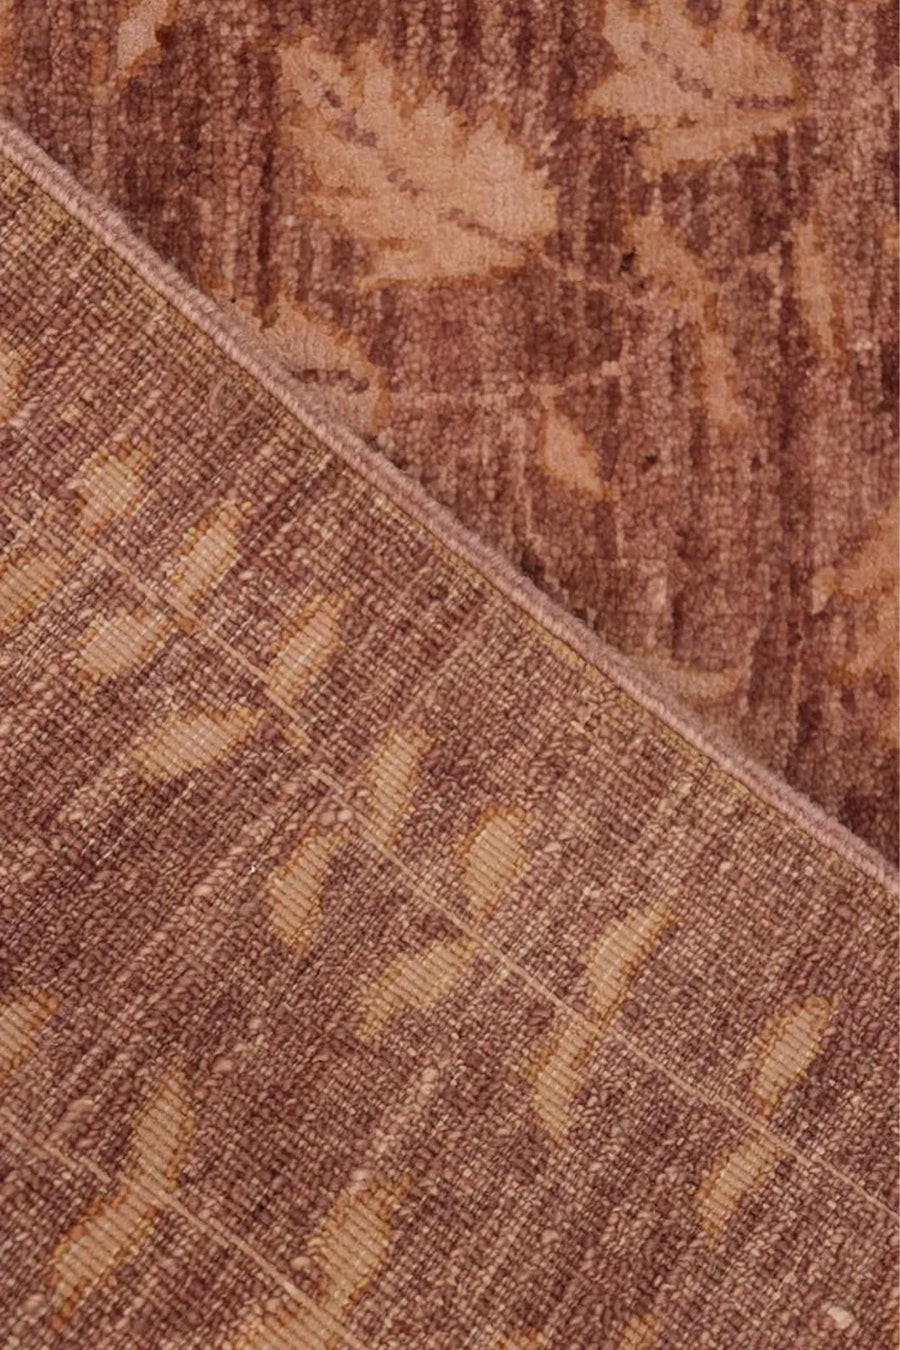 Handcrafted brown area rug made from high-quality New Zealand wool.